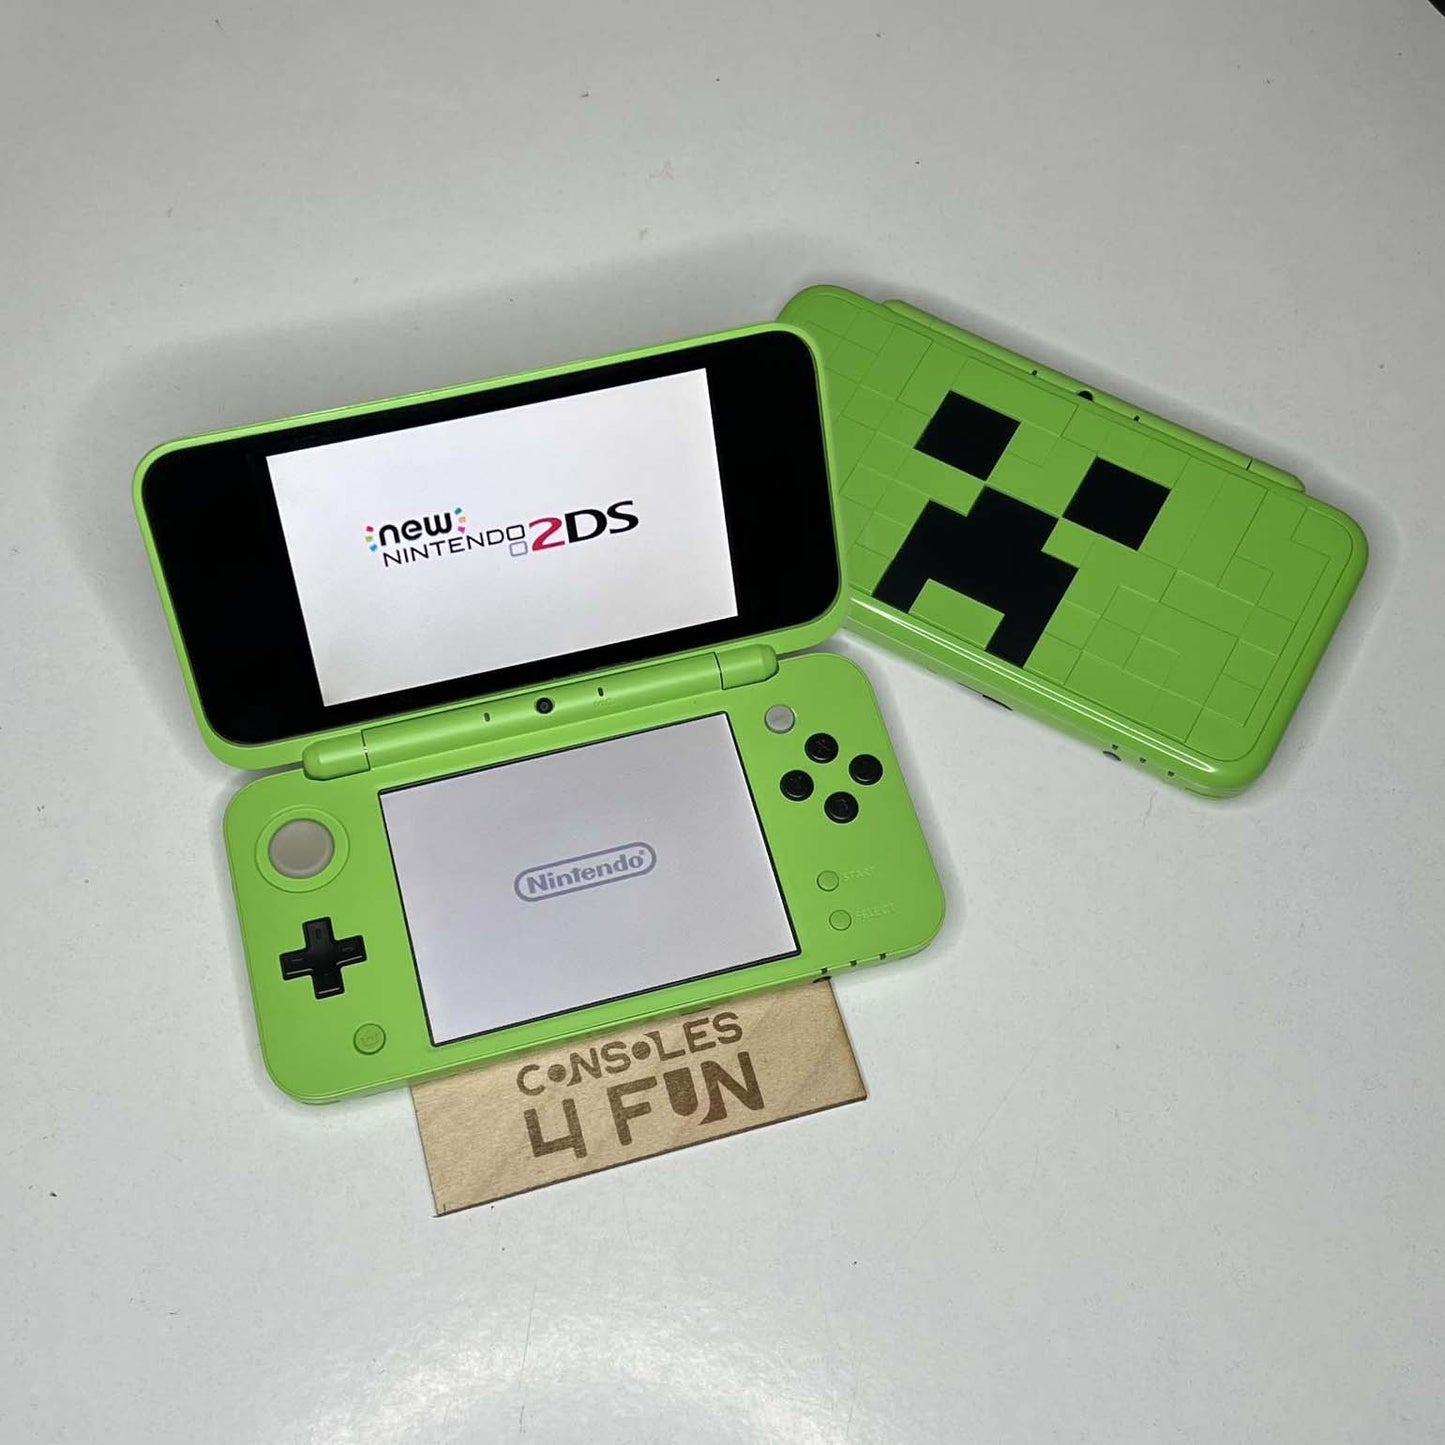 New Nintendo 2DS XL with Games